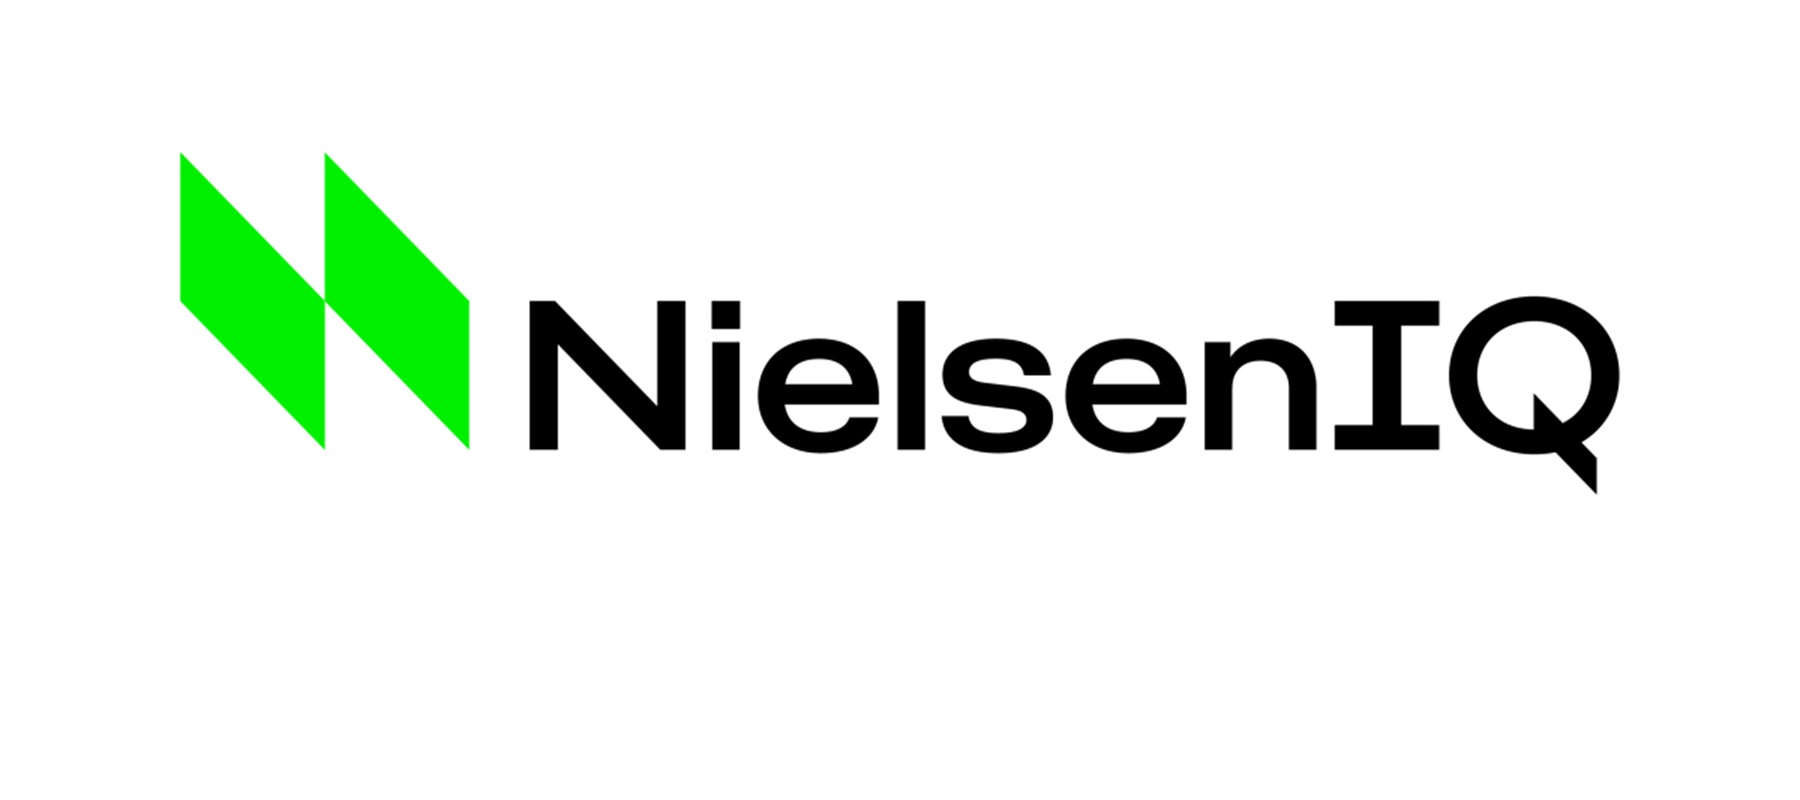 NielsenIQ and TransUnion collaborate to enable targeted advertising with first-party retail purchase data